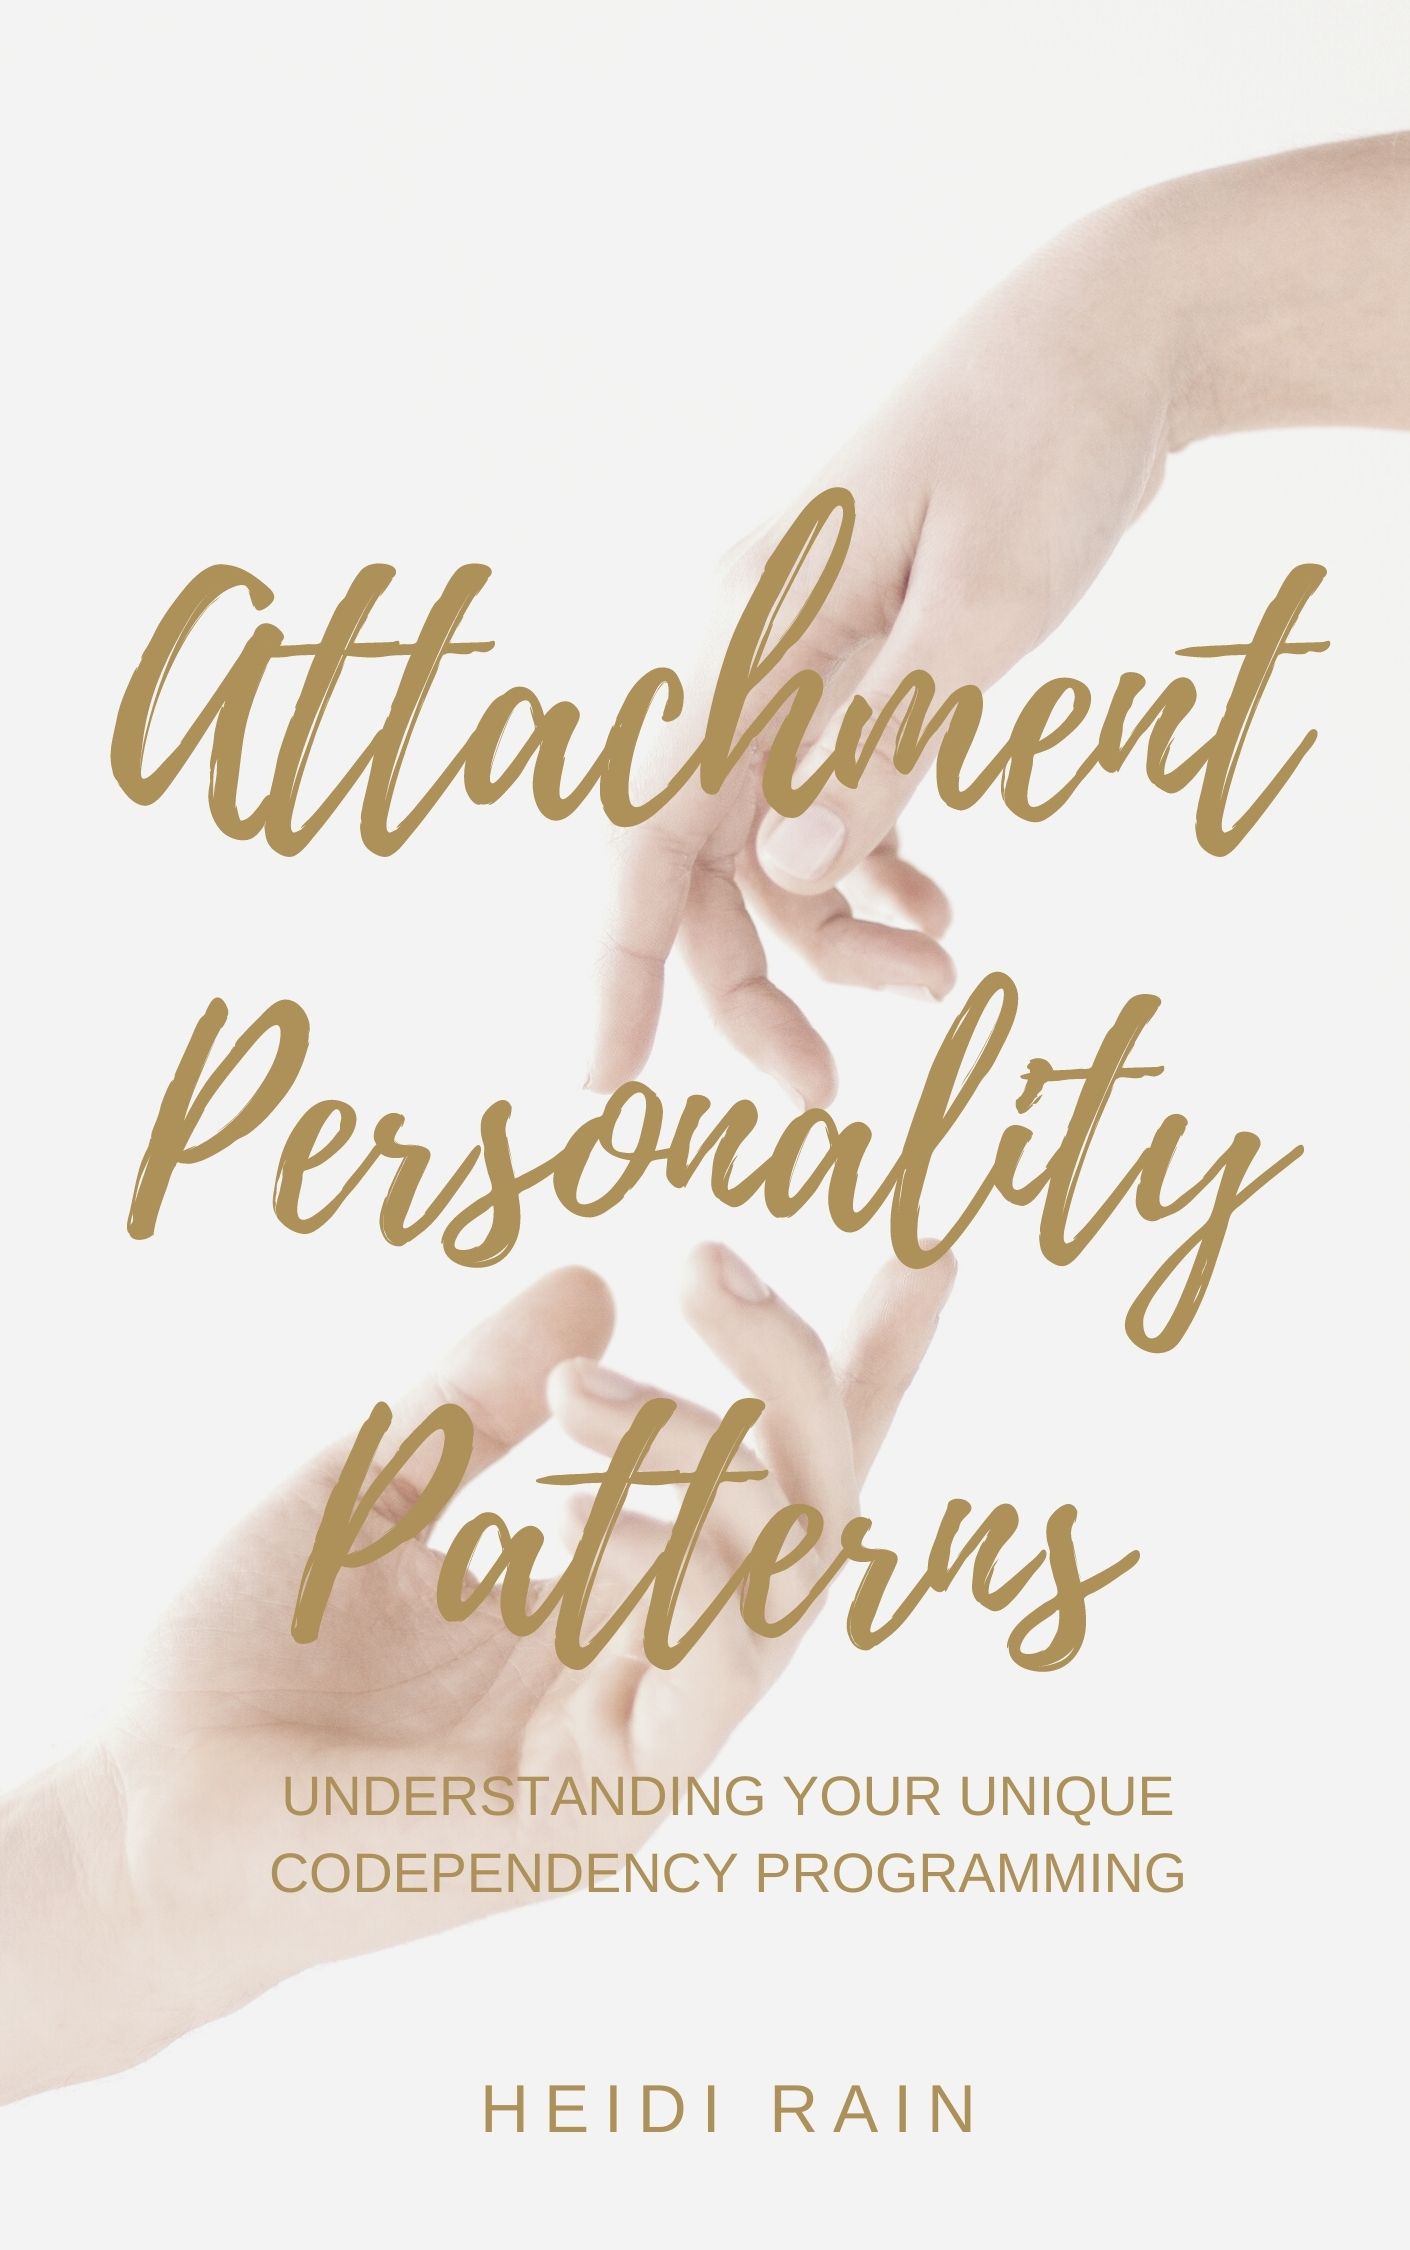 attachment personality patterns